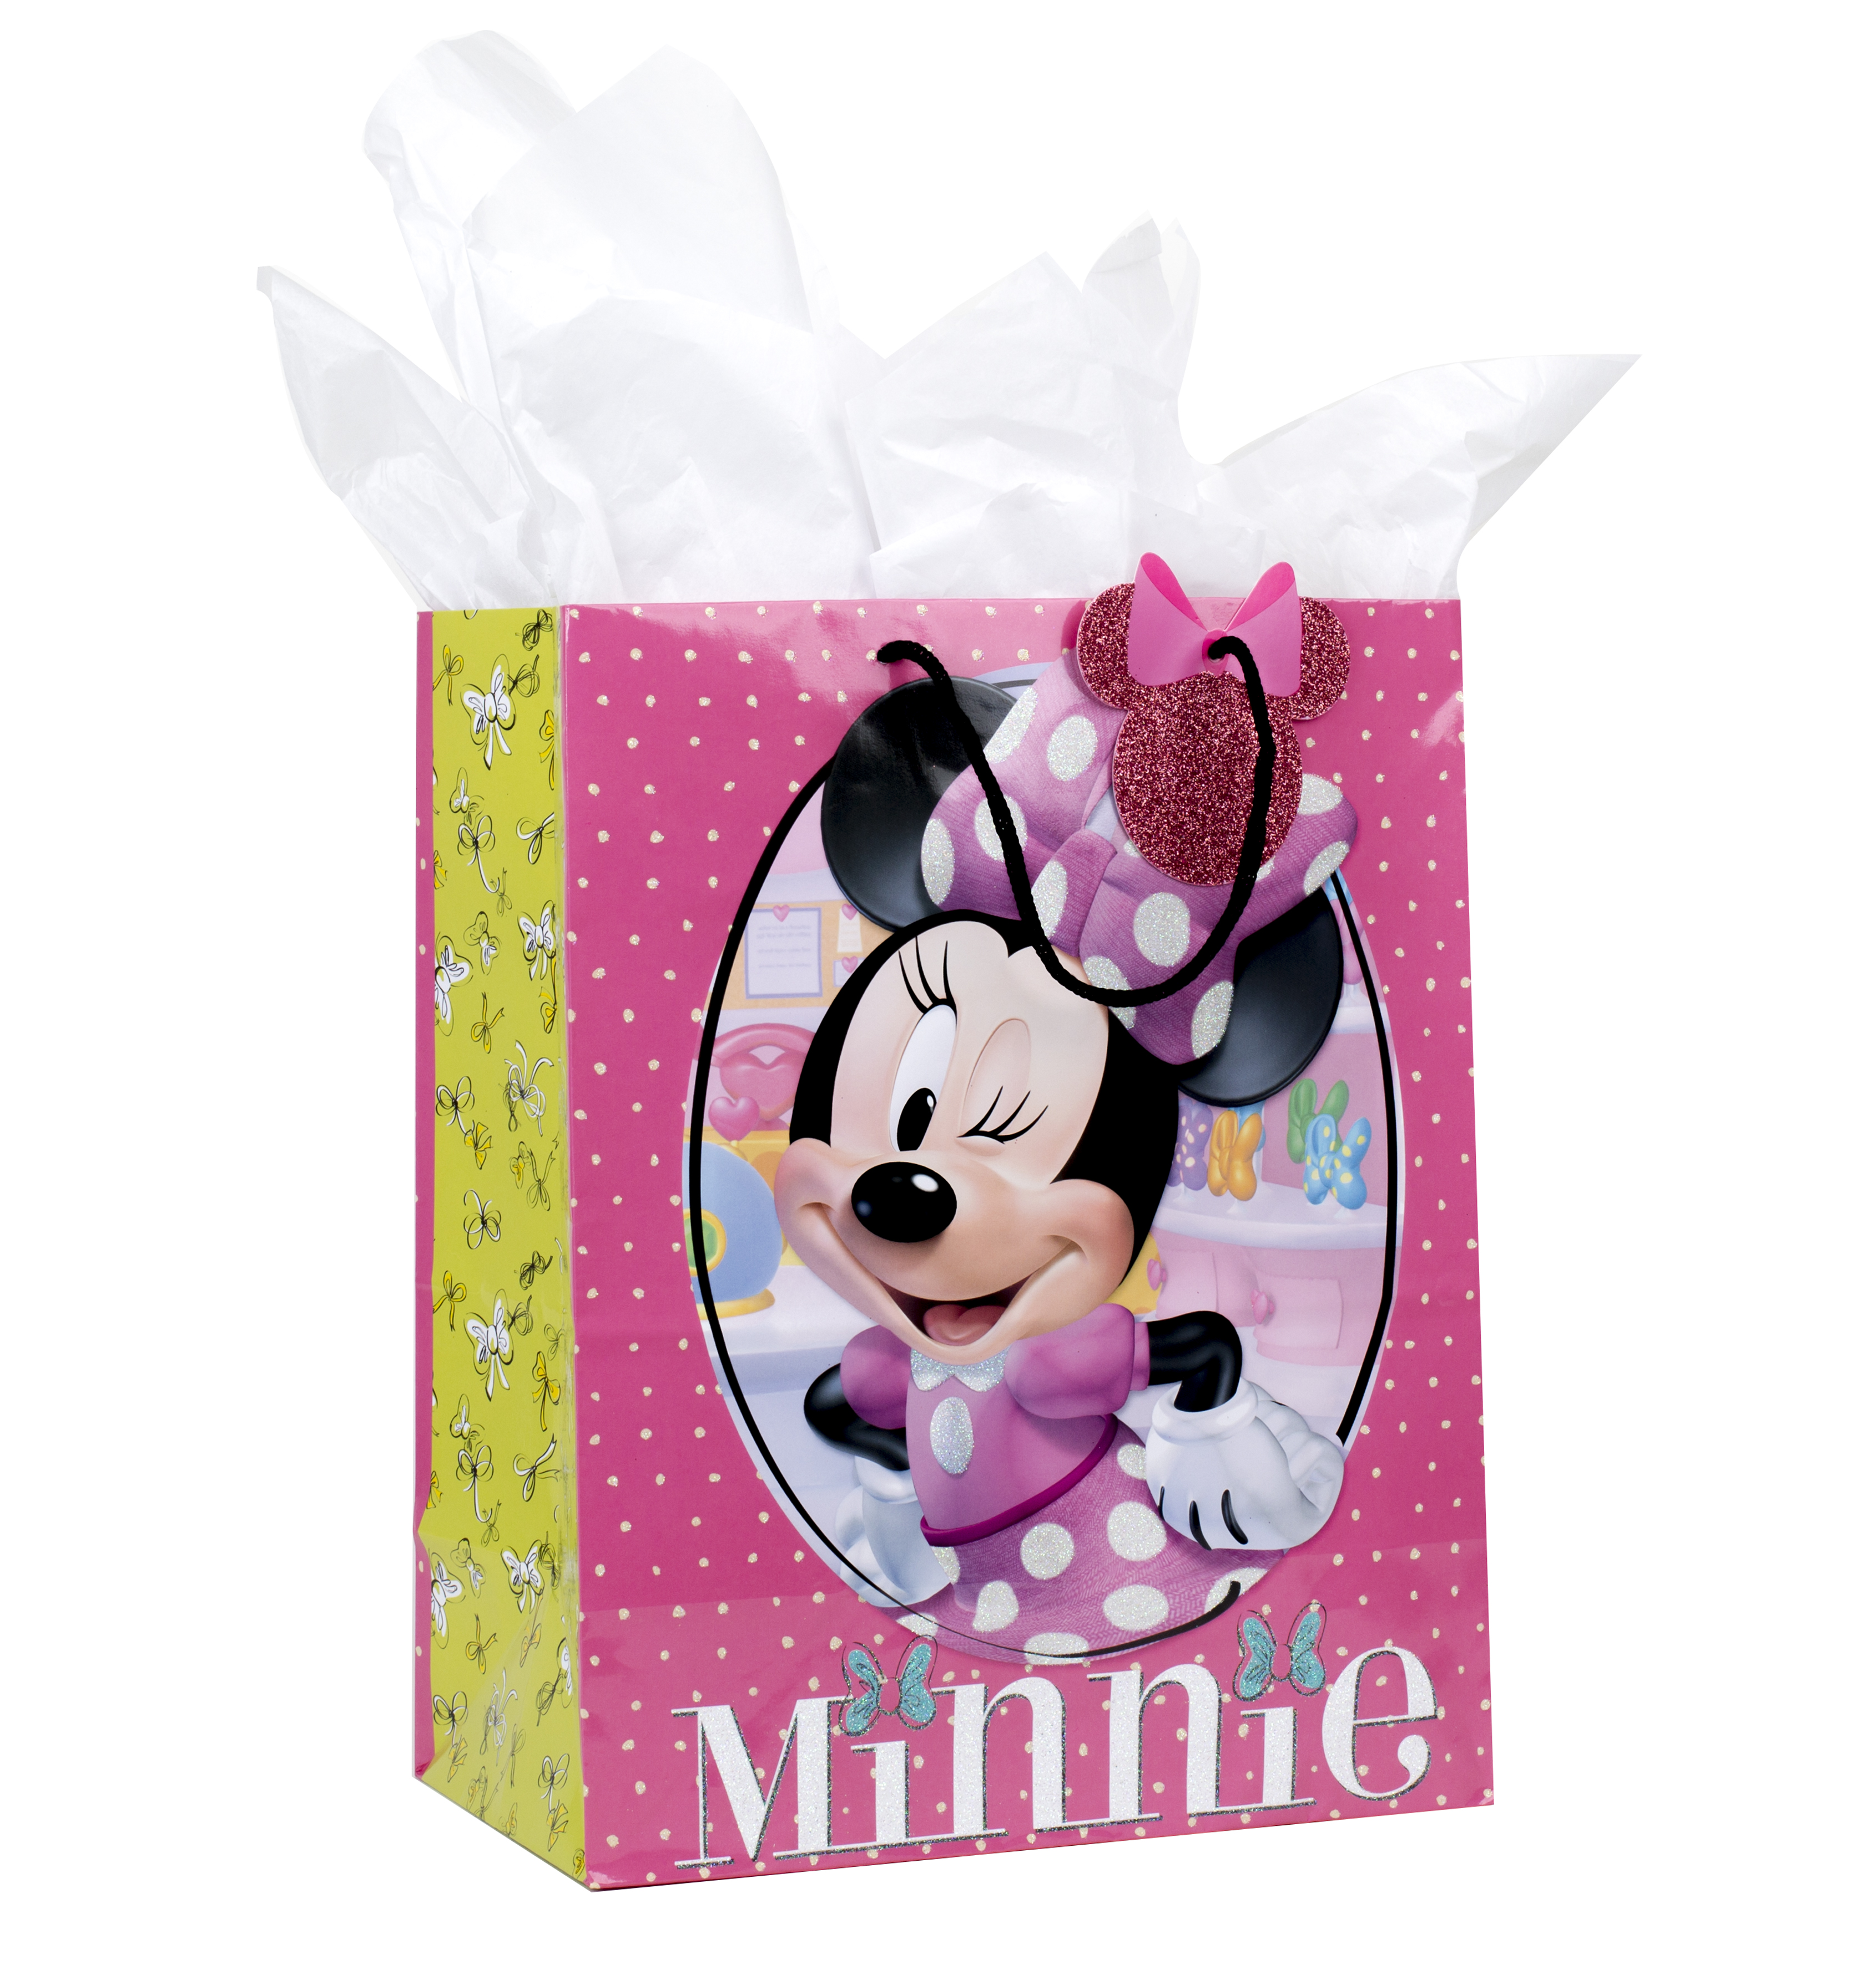 Minnie Mouse Pink and Gold Favor Bags-Custom Chip Bags-Minnie Mouse Birthday-Digital-Printable Minnie Mouse-Printed-Party Bags-Party Favors